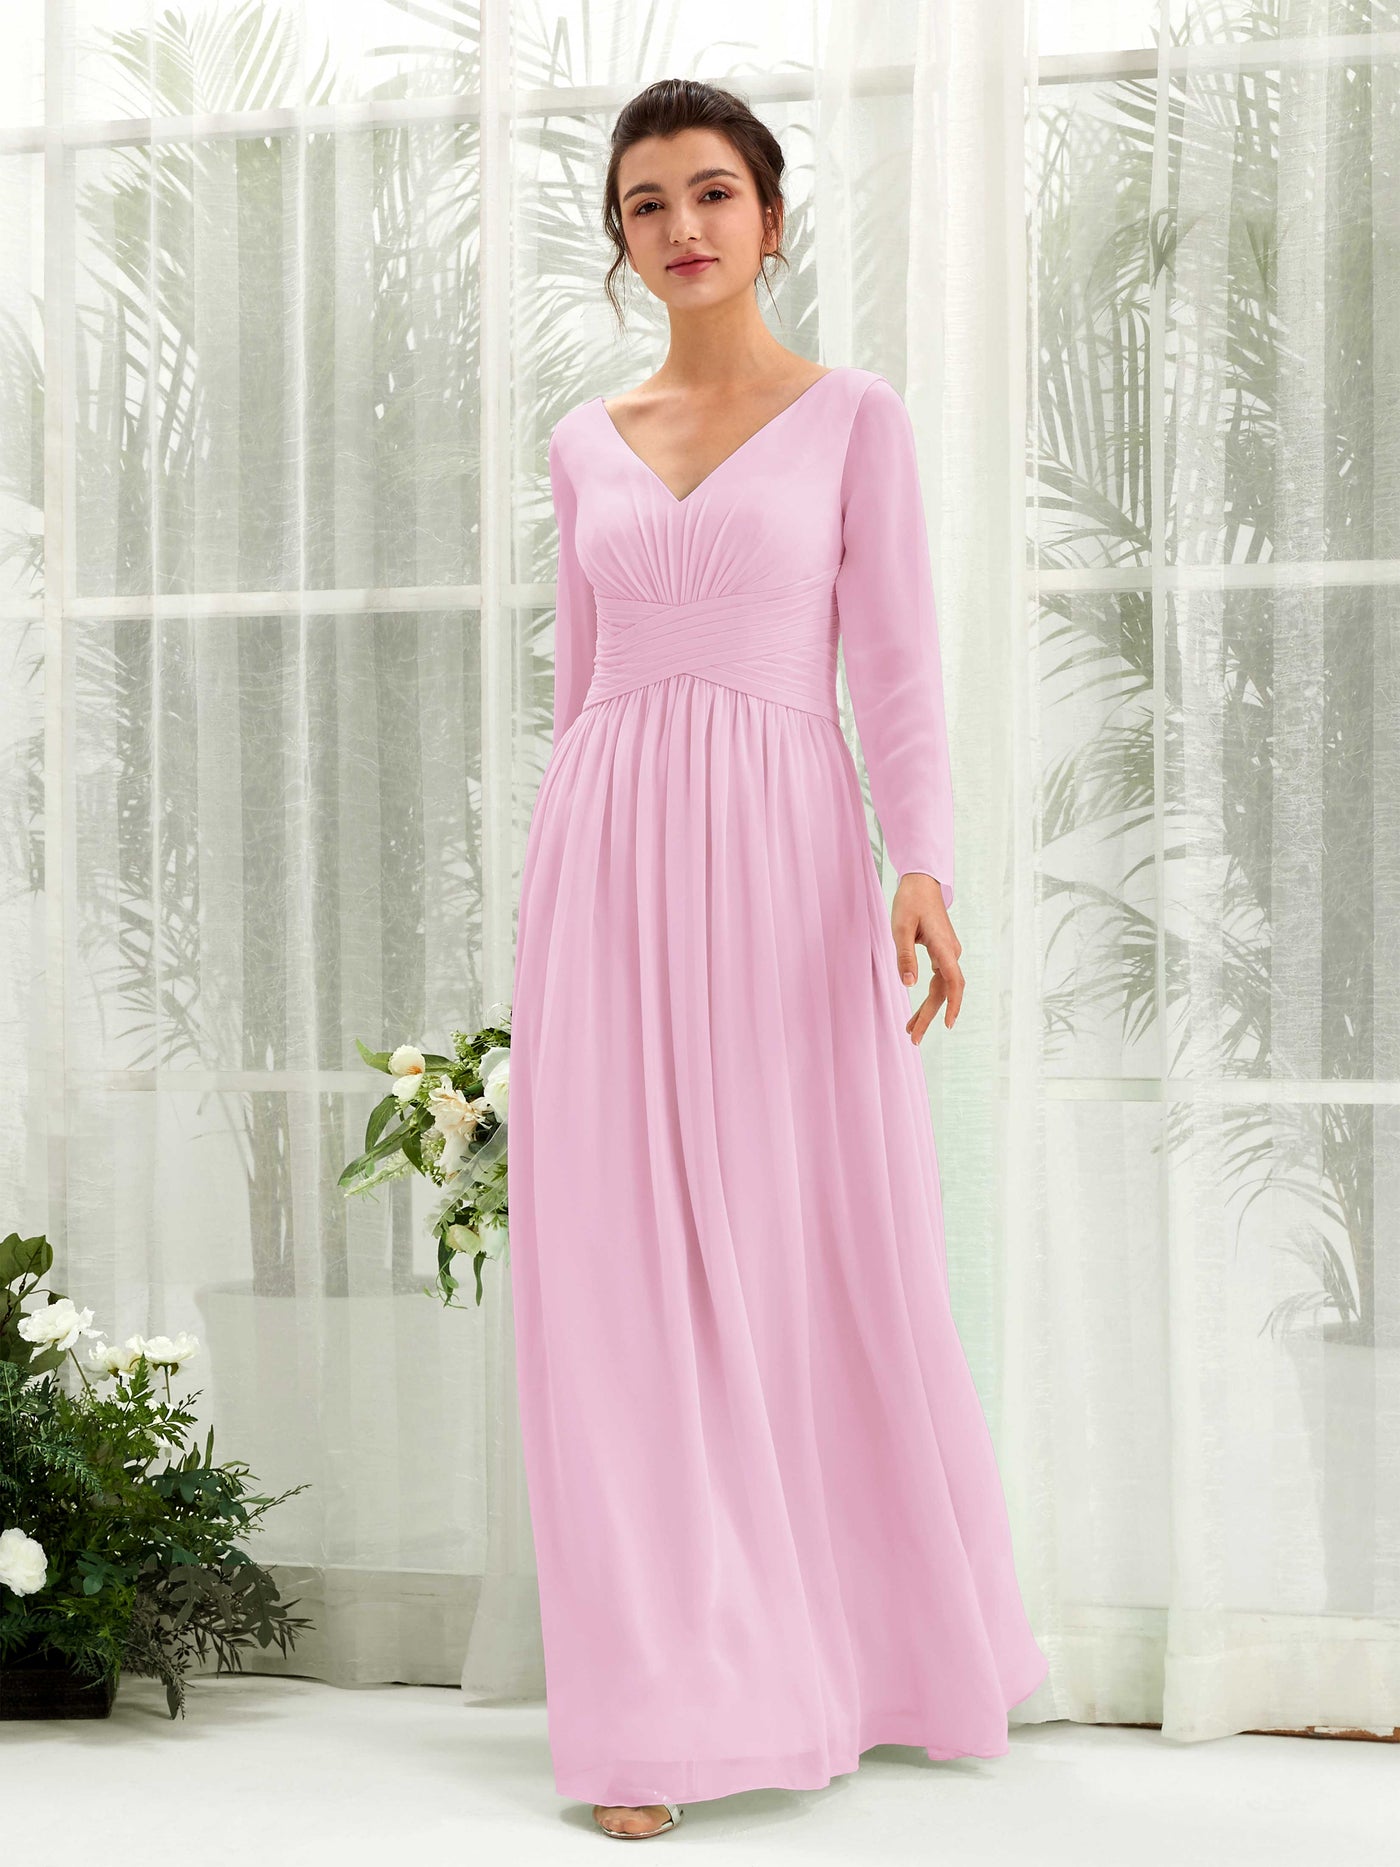 Candy Pink Bridesmaid Dresses Bridesmaid Dress A-line Chiffon V-neck Full Length Long Sleeves Wedding Party Dress (81220339)#color_candy-pink